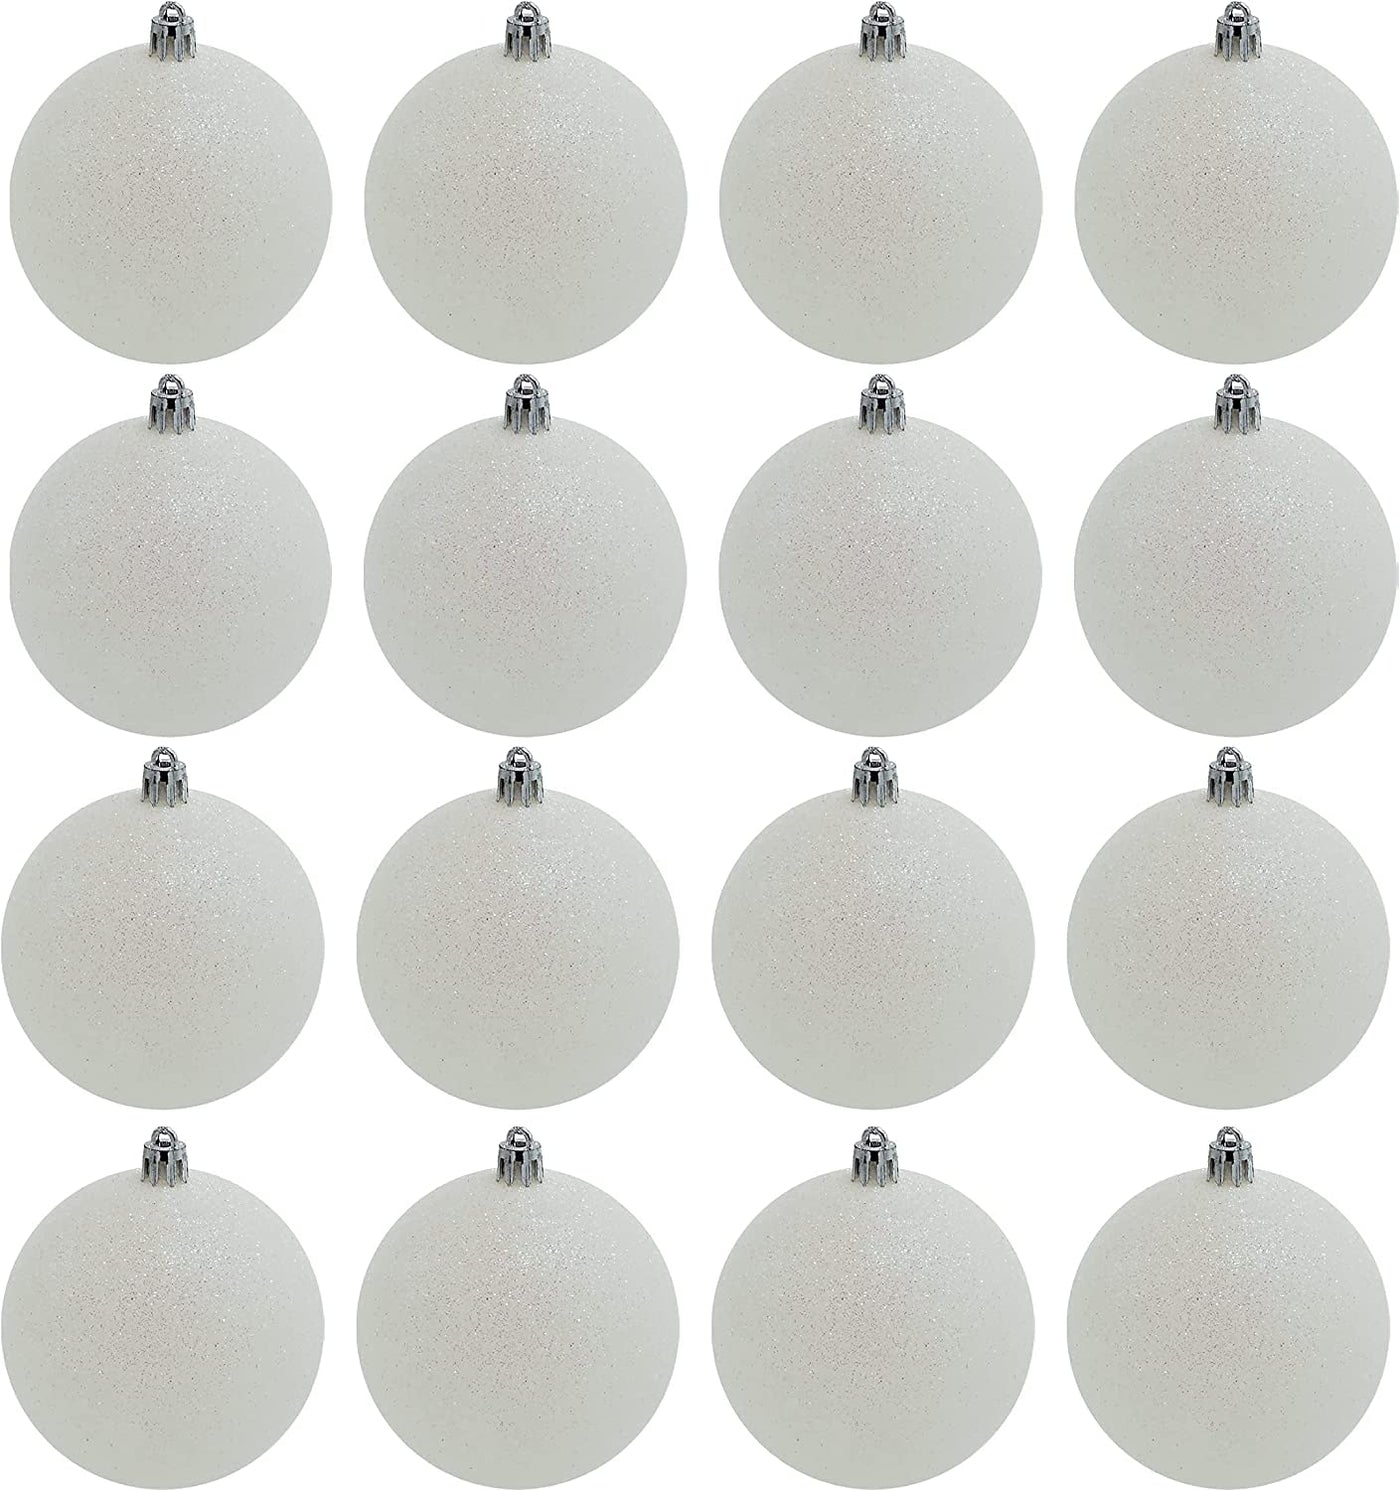 White Snowball Ornament (18 Pack) 2.36 Inch 60mm Glitter Sparkly Snow Ball Christmas Ornament for Christmas Tree Decoration, Iridescent Ornaments Shatterproof Plastic Bulk Set by 4E's Novelty